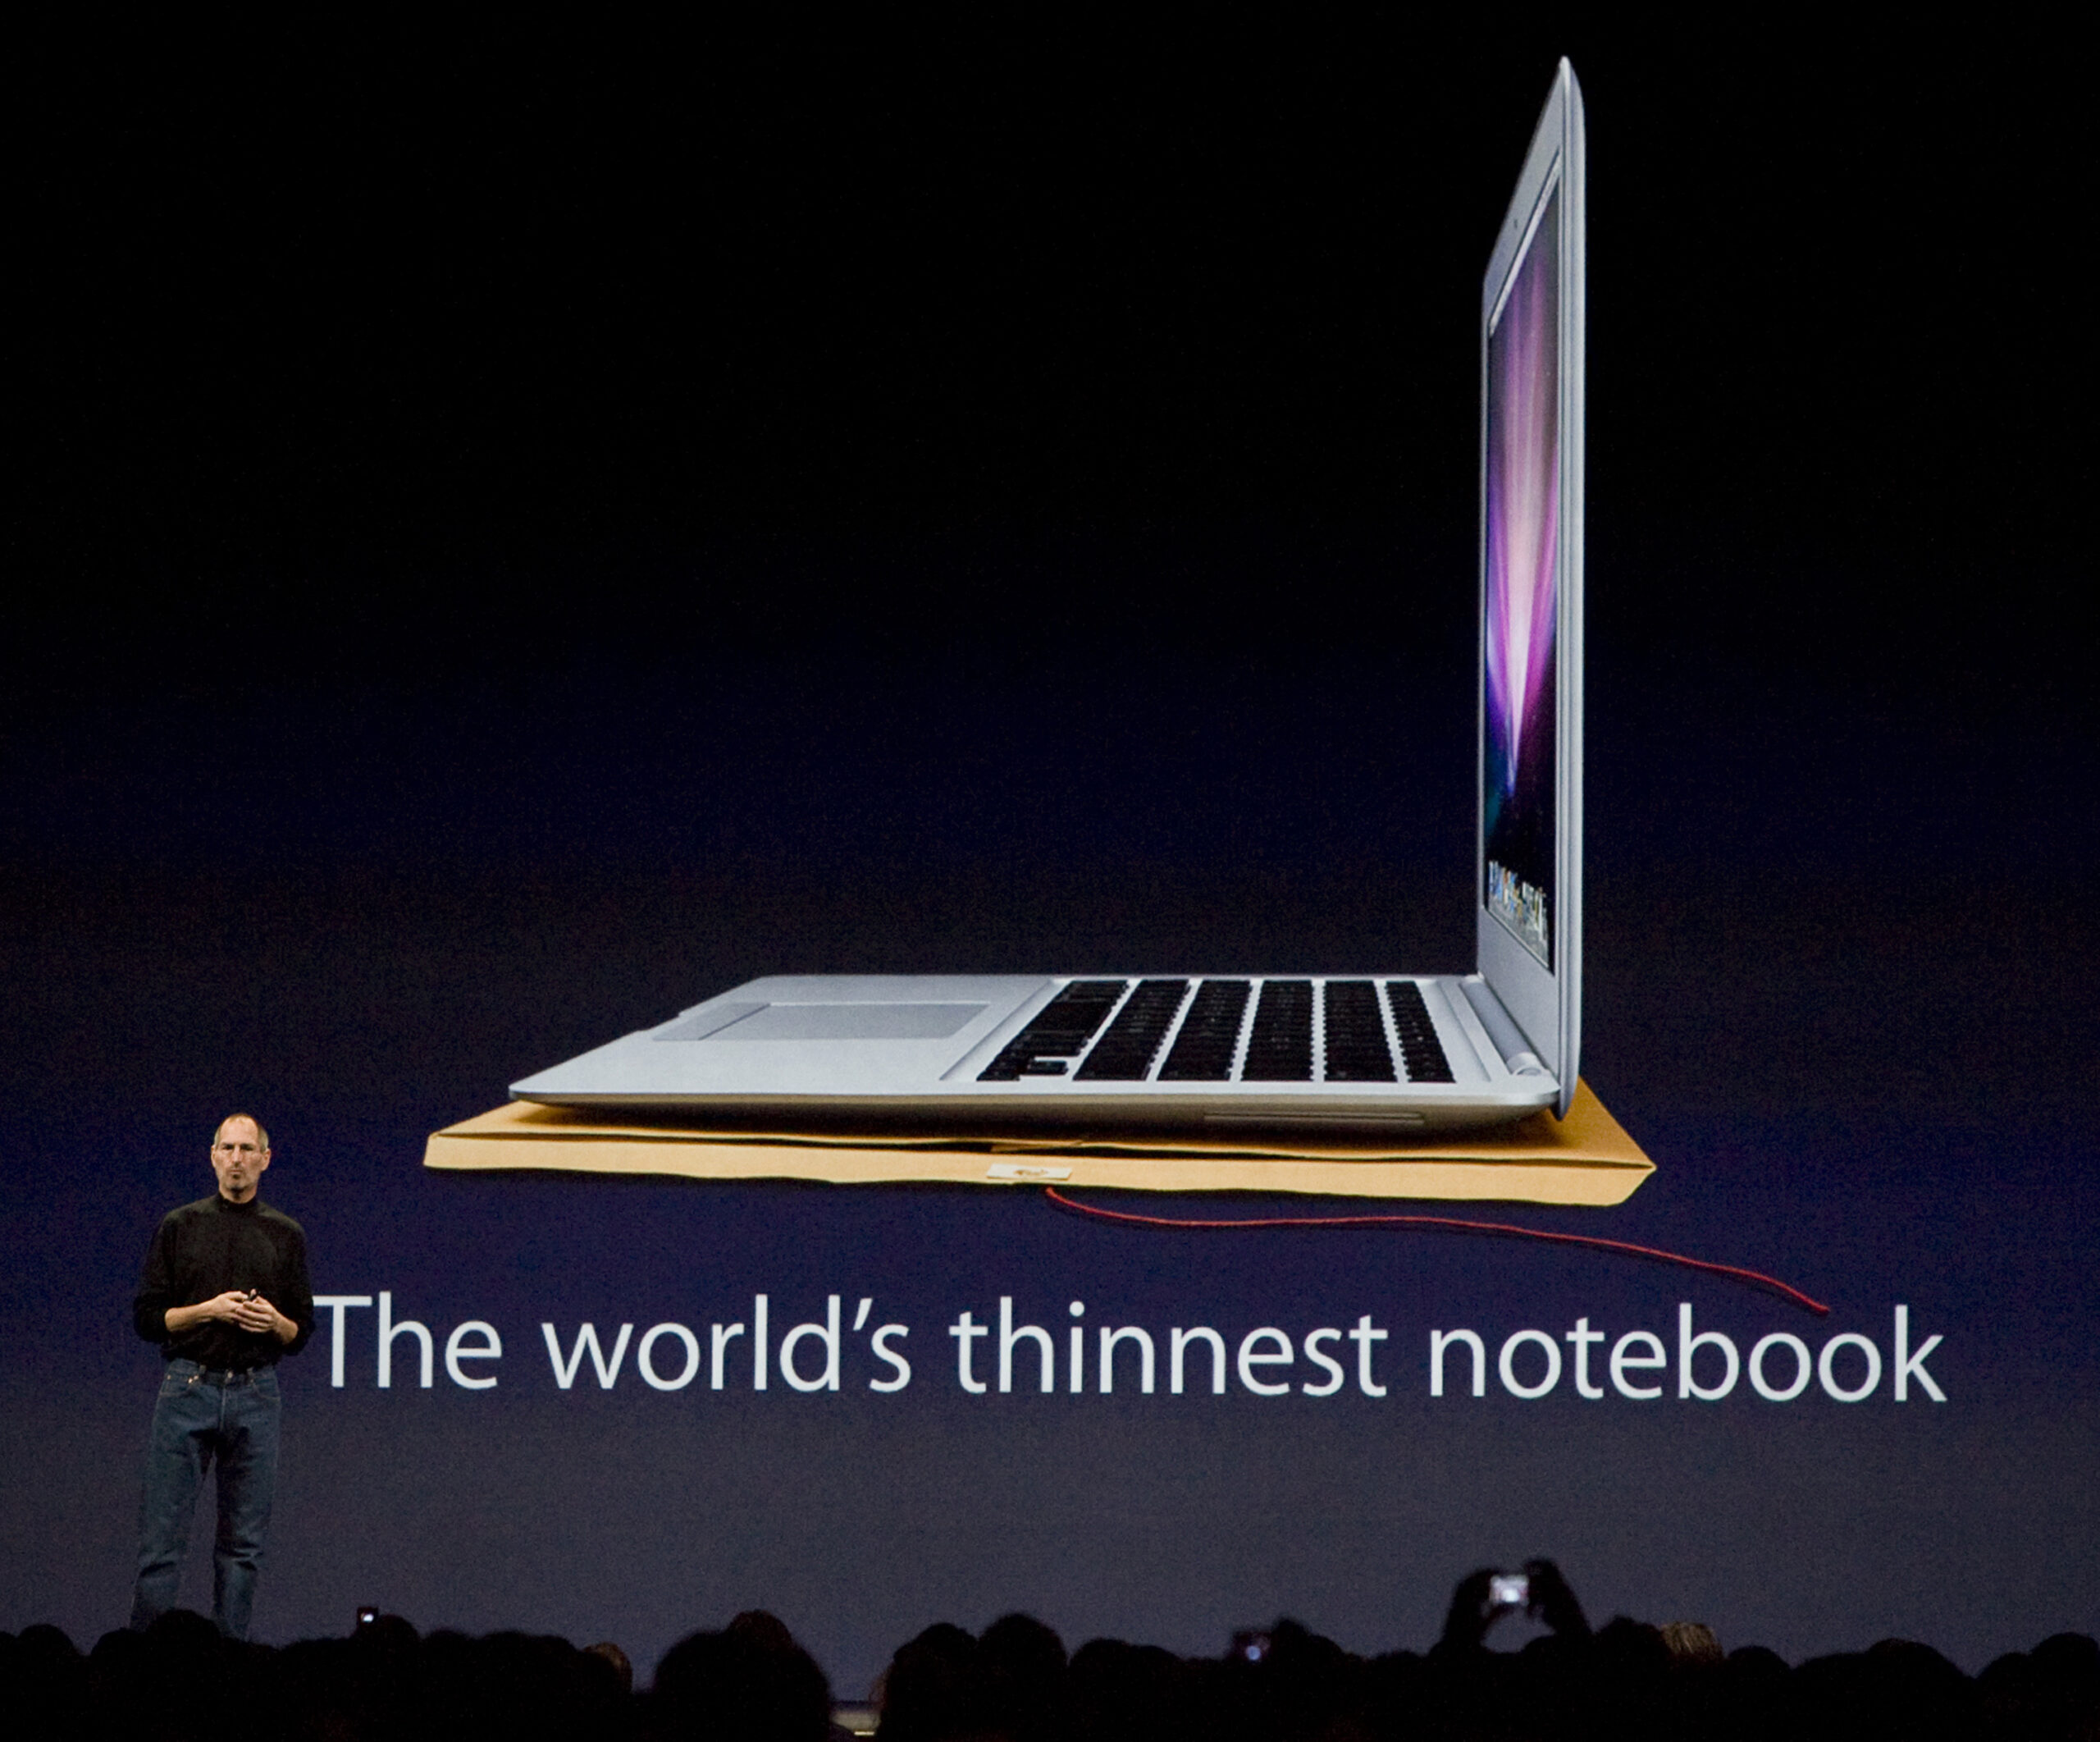 Apple CEO Steve Jobs announced the new Macbook Air, at the Macworld Conference and Expo in San Francisco, California, on Tuesday, January 15, 2008. The laptop billed as the world's thinnest computer features a 13.3" widescreen, a keyboard that has an ambient light sensor and a multi-touch trackpad. (John Green/San Mateo County Times/MCT)